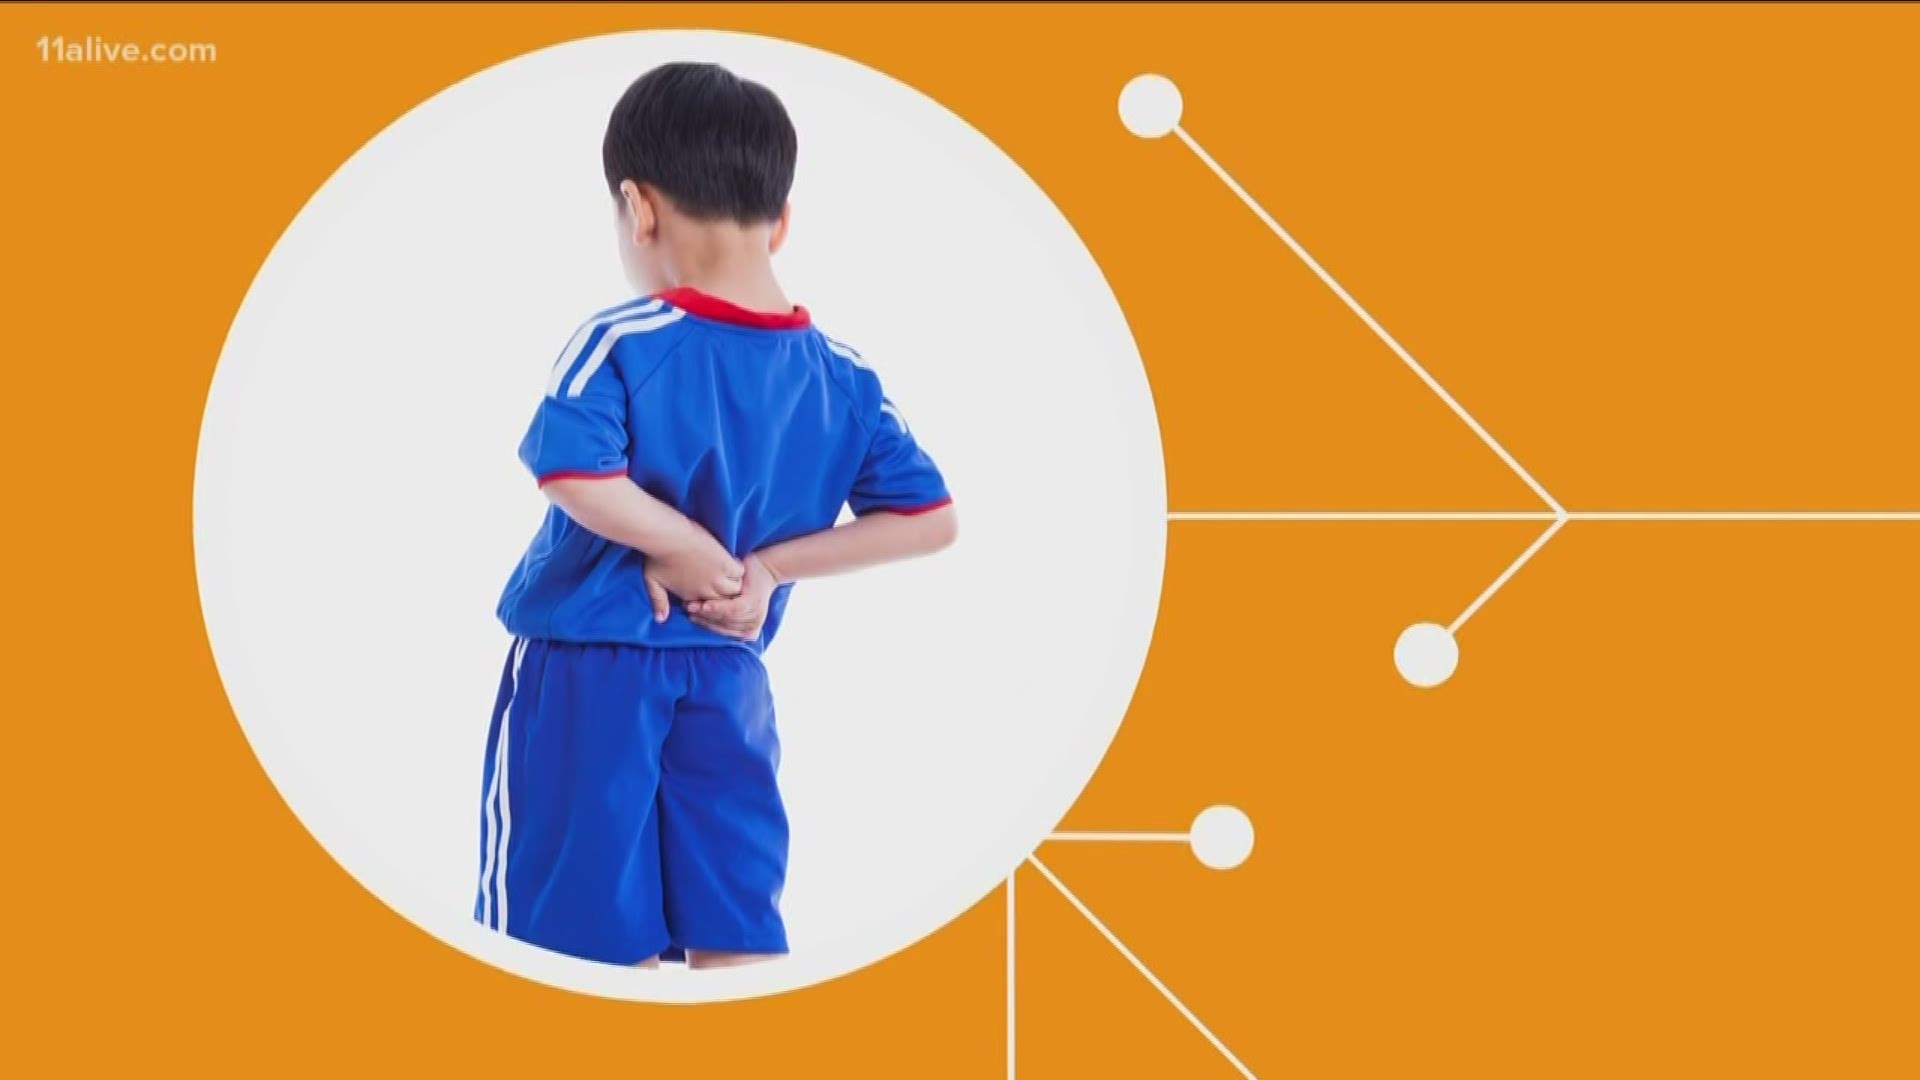 Studies show that at least 30 percent of young children experience some form of back pain.